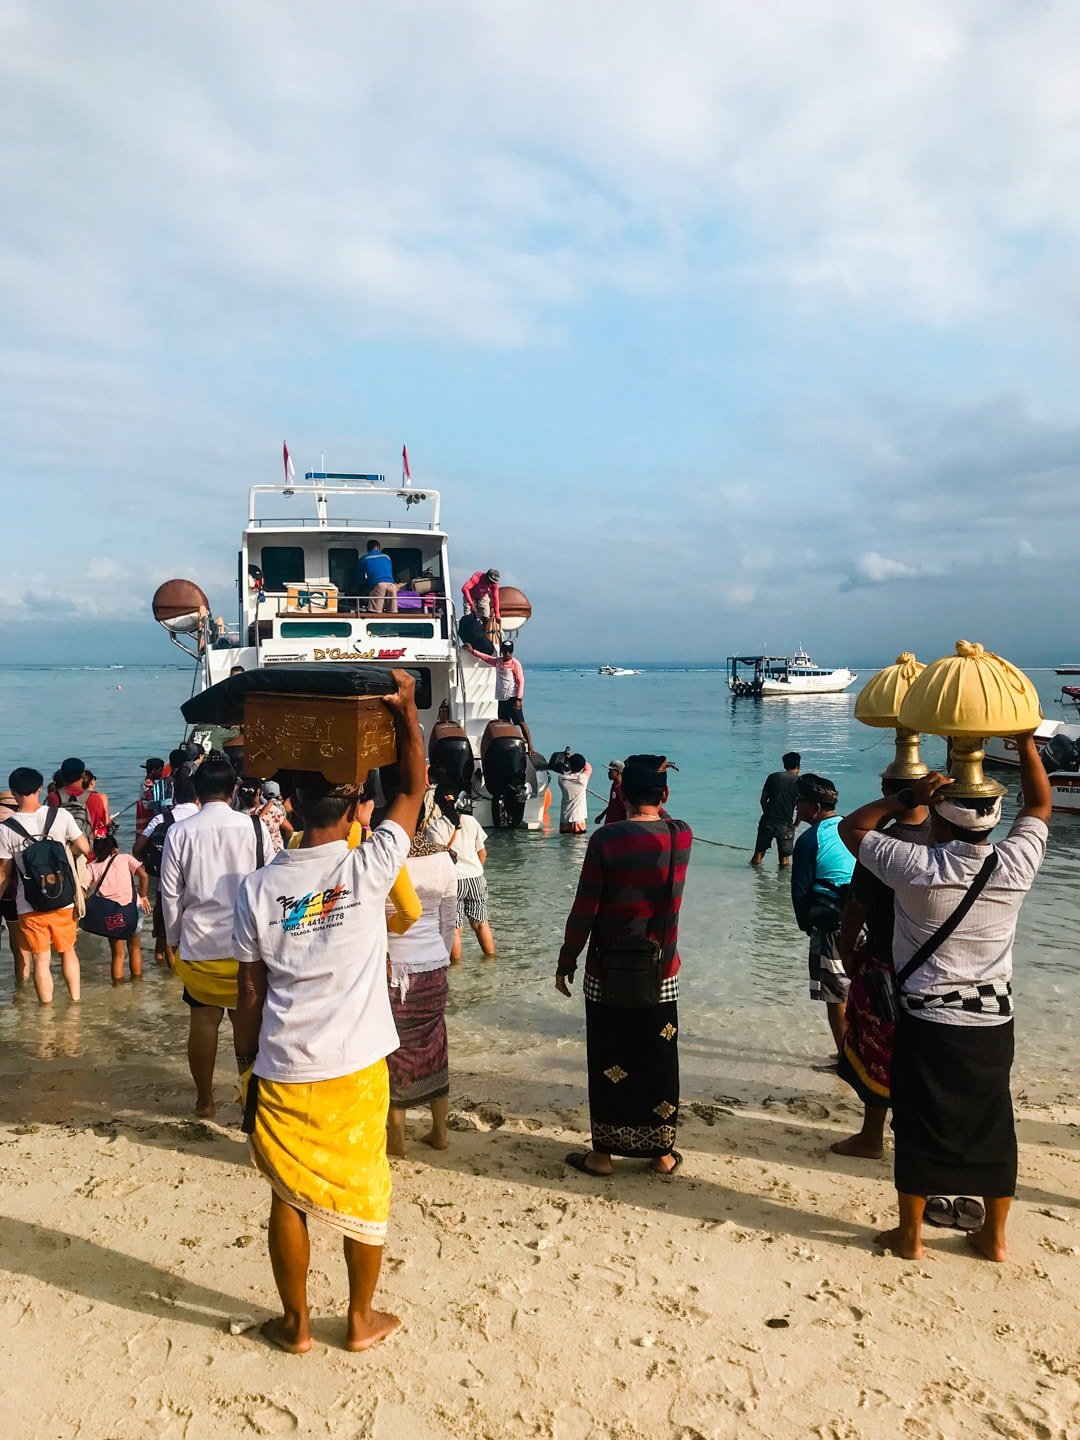 Loading a D'Camel Fast Ferry in Lembongan